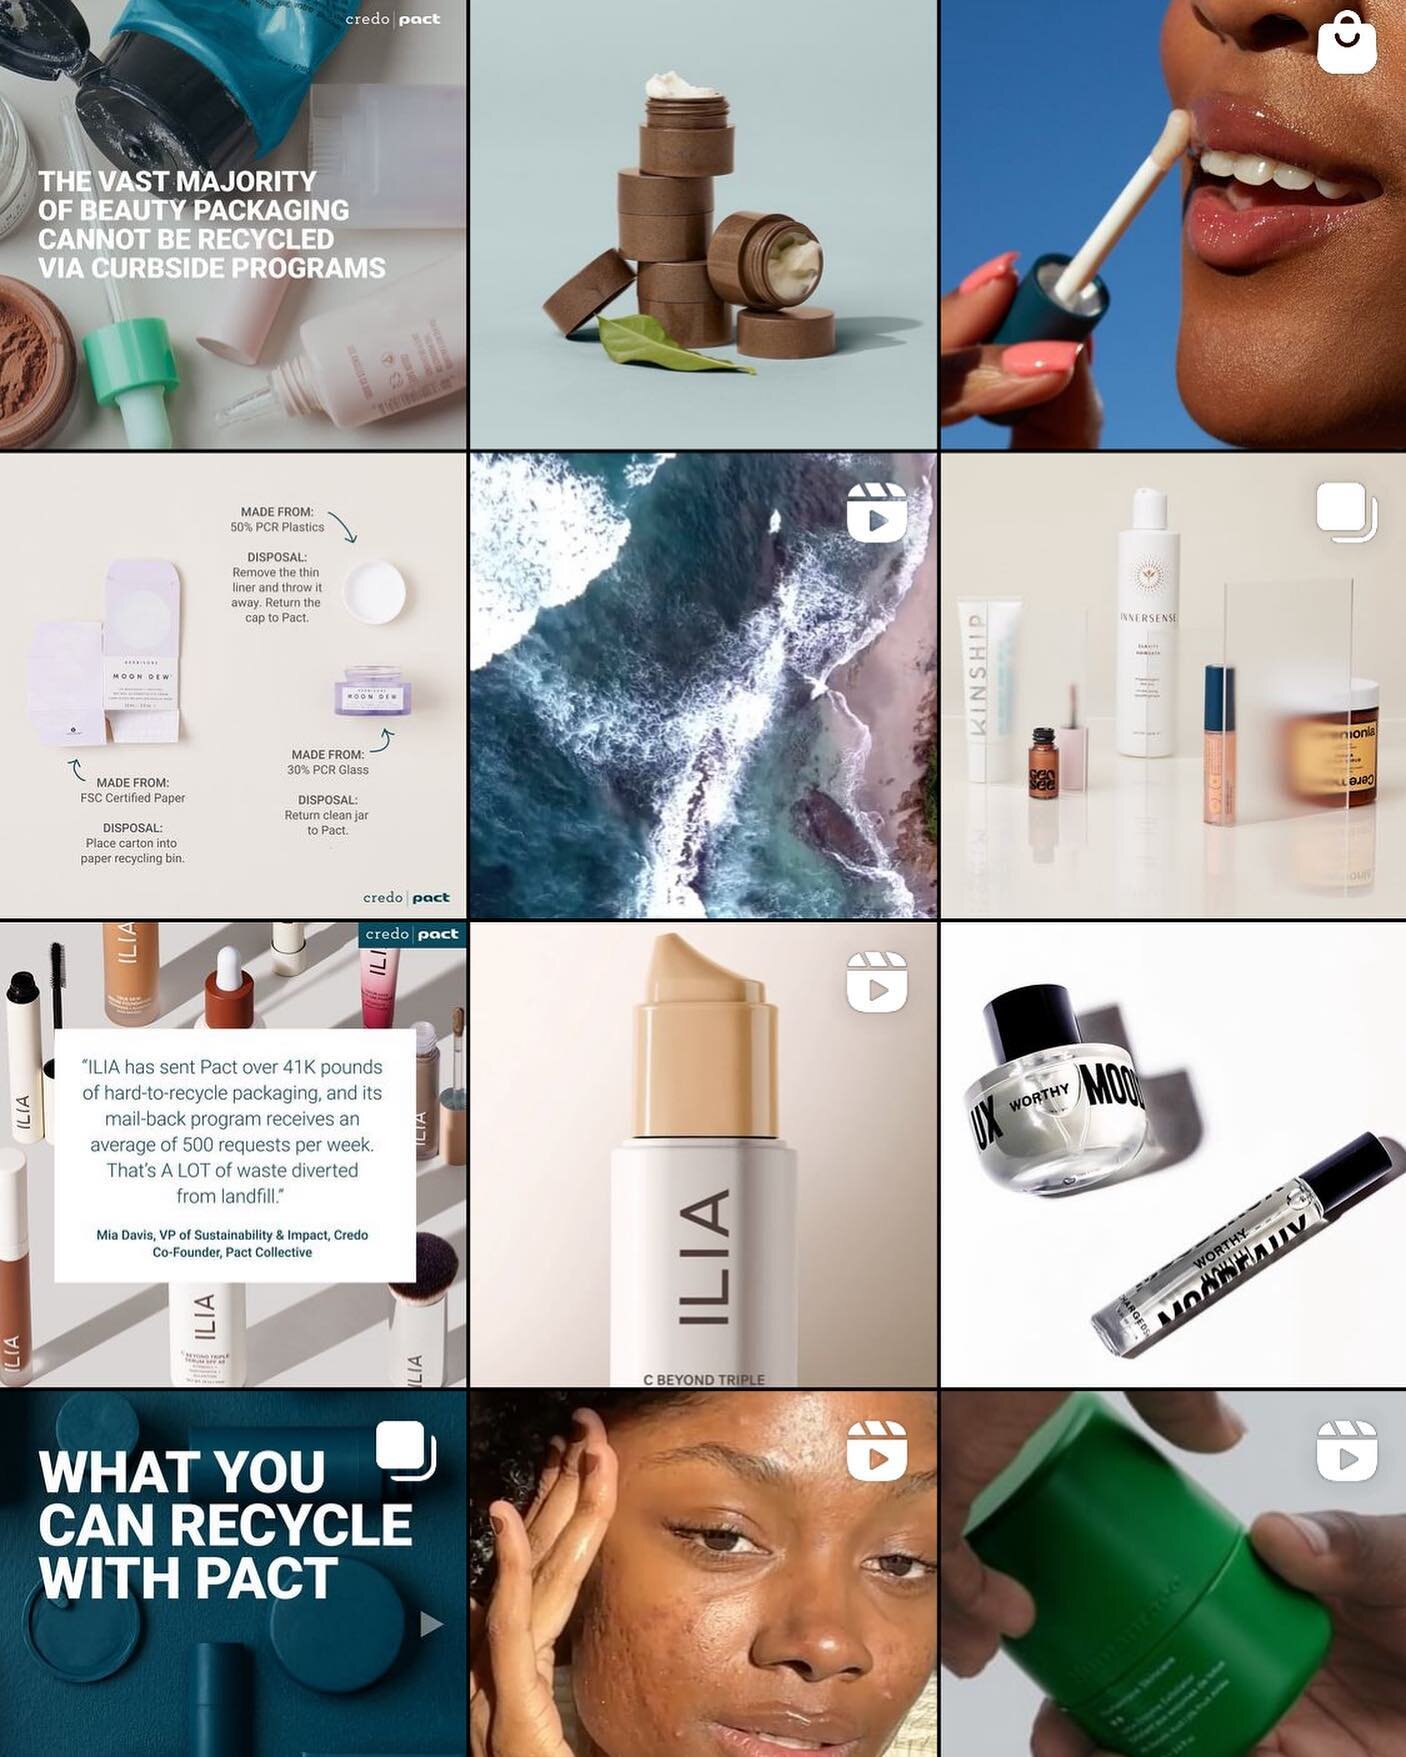 From was enlisted to manage the social creative for @credobeauty last year, in the midst of a major brand overhaul.

This is a snapshot of the storytelling we did around the brand&rsquo;s spring sustainability campaign.

Do you need help conceptualiz